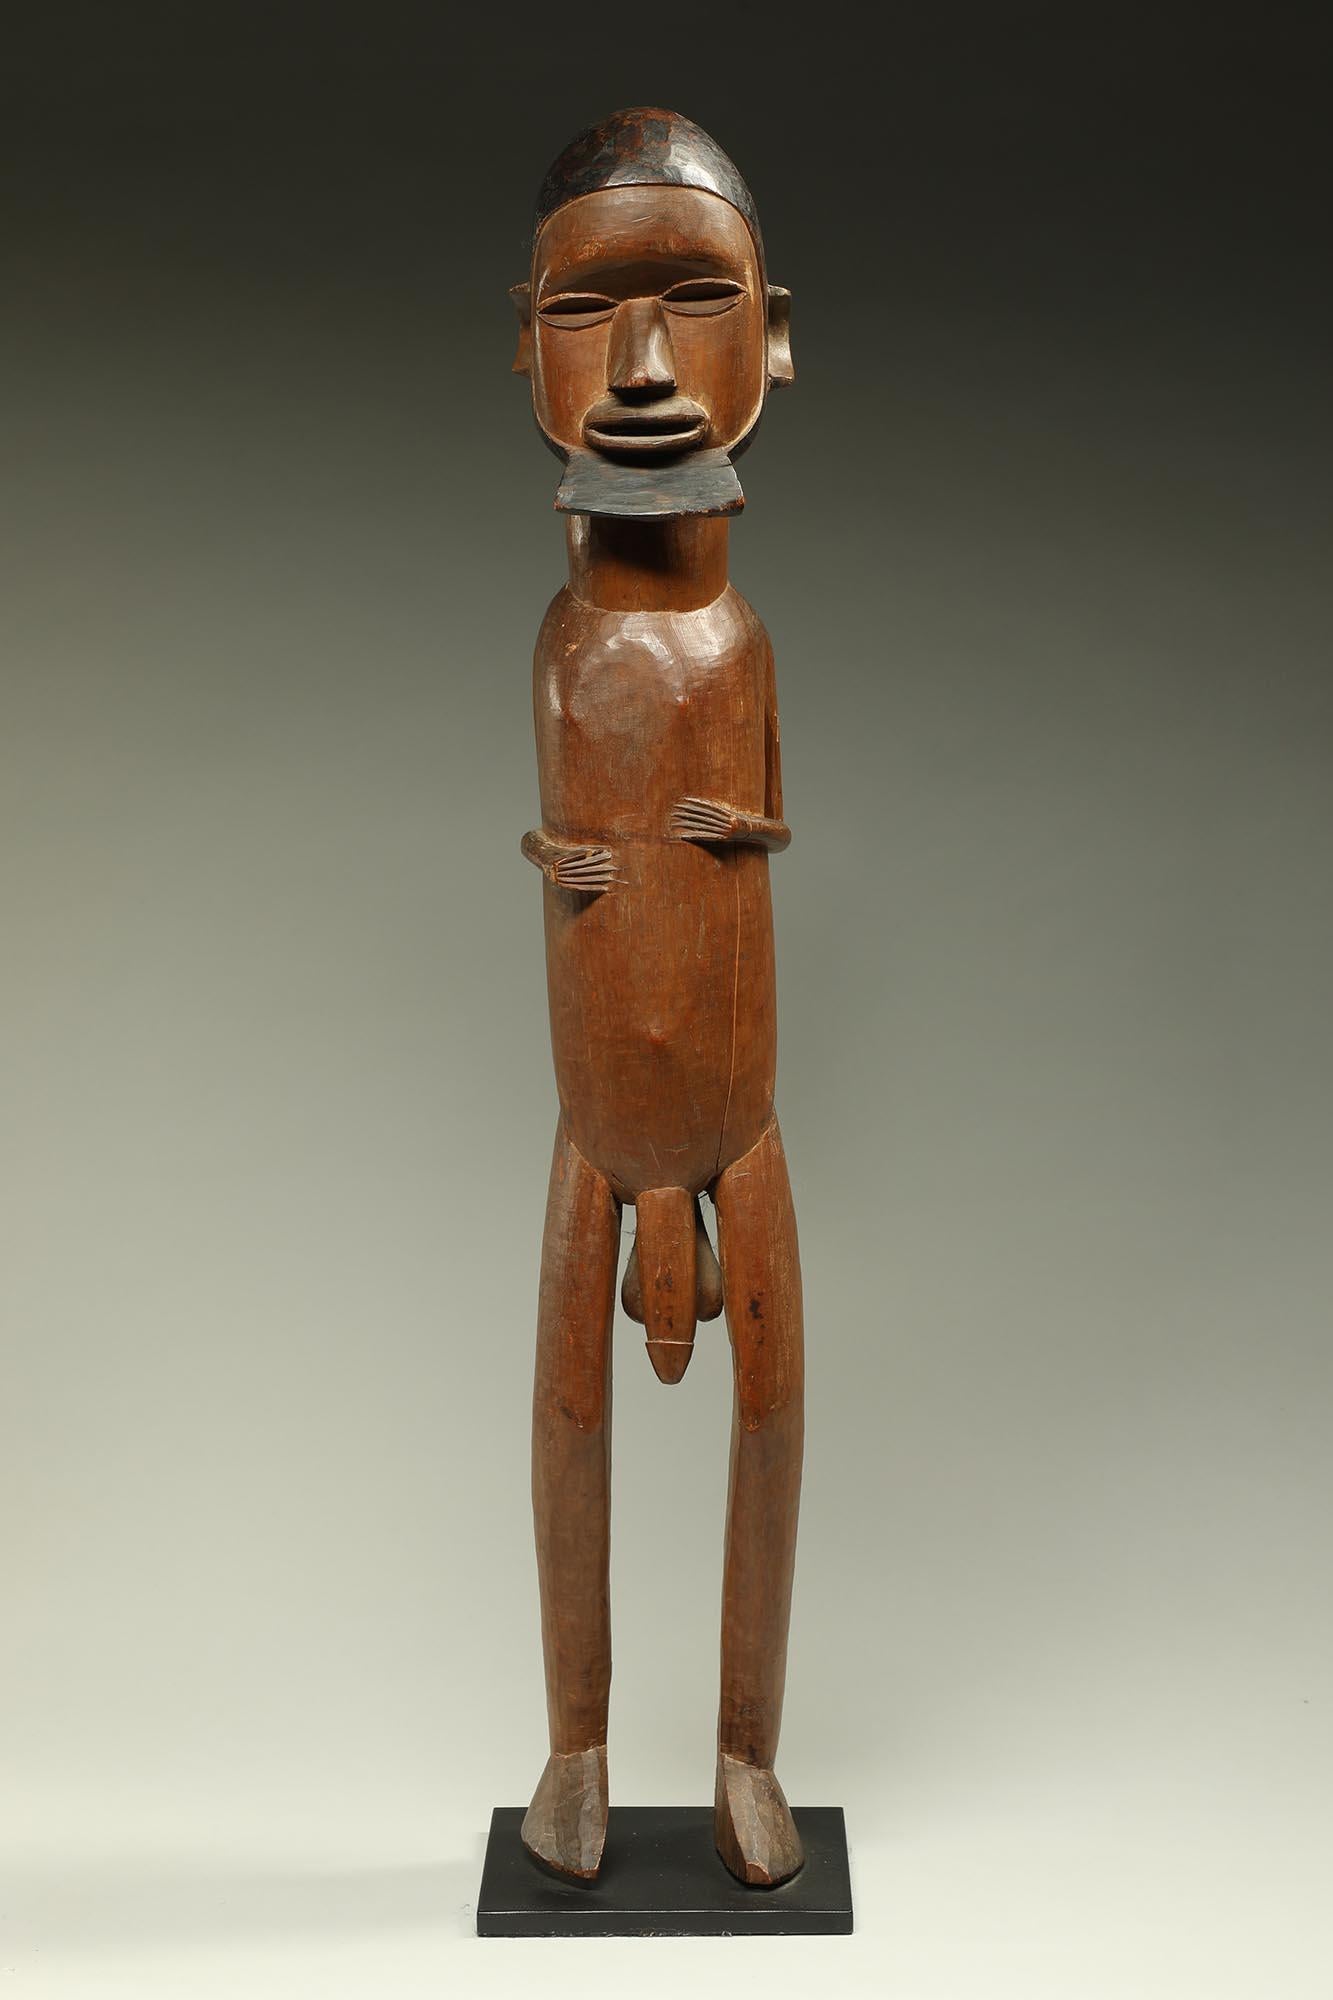 Early large standing male Teke figure with classic darkened beard and hair.  Small stylized arms and hands on chest.
ex- CA collection, acquired in 1998 from San Francisco Gallery.
28 1/2 inches high, on custom metal stand.
Created mid 20th century